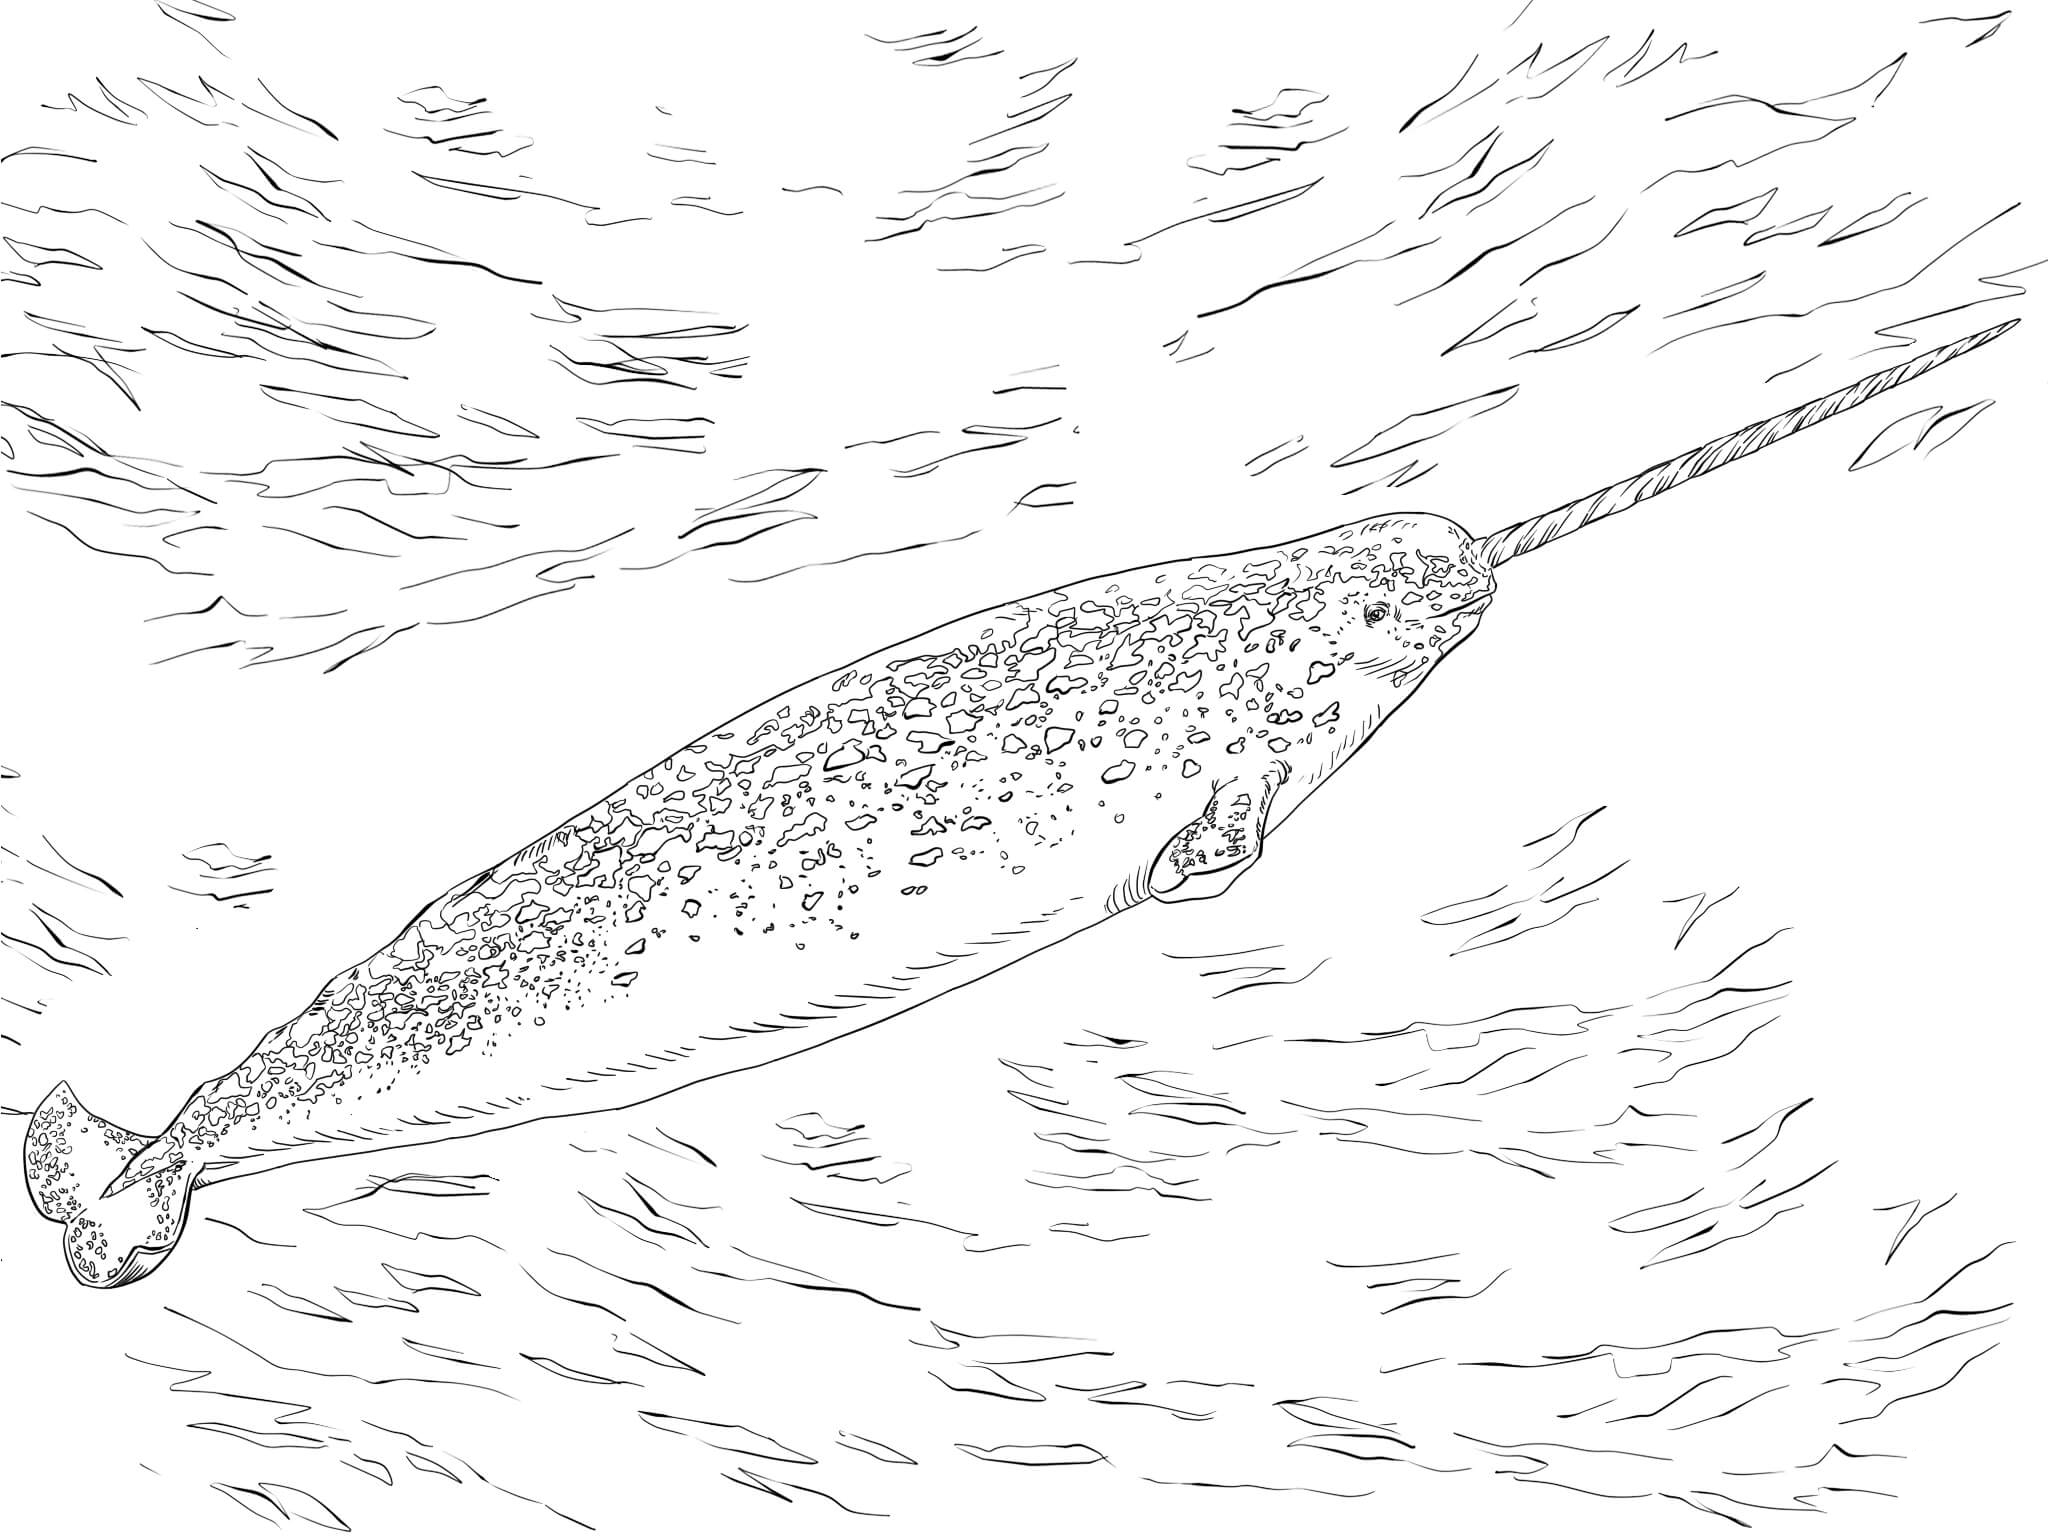 Narwhal Coloring Pages - Best Coloring Pages For Kids